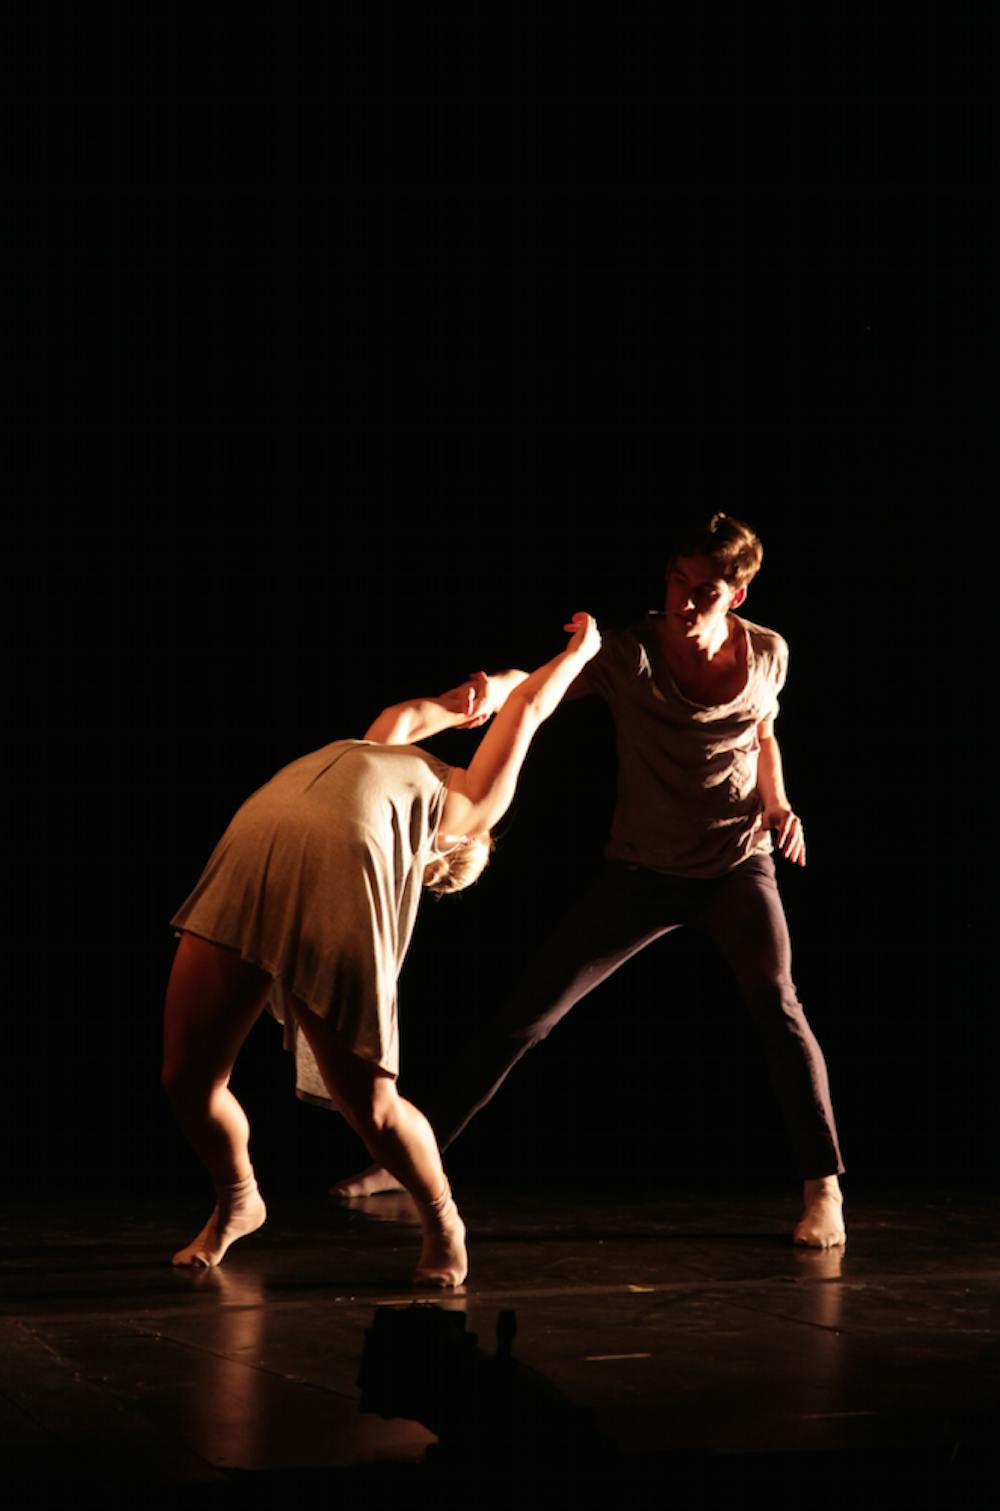 Dance Theatre show combines old, new styles